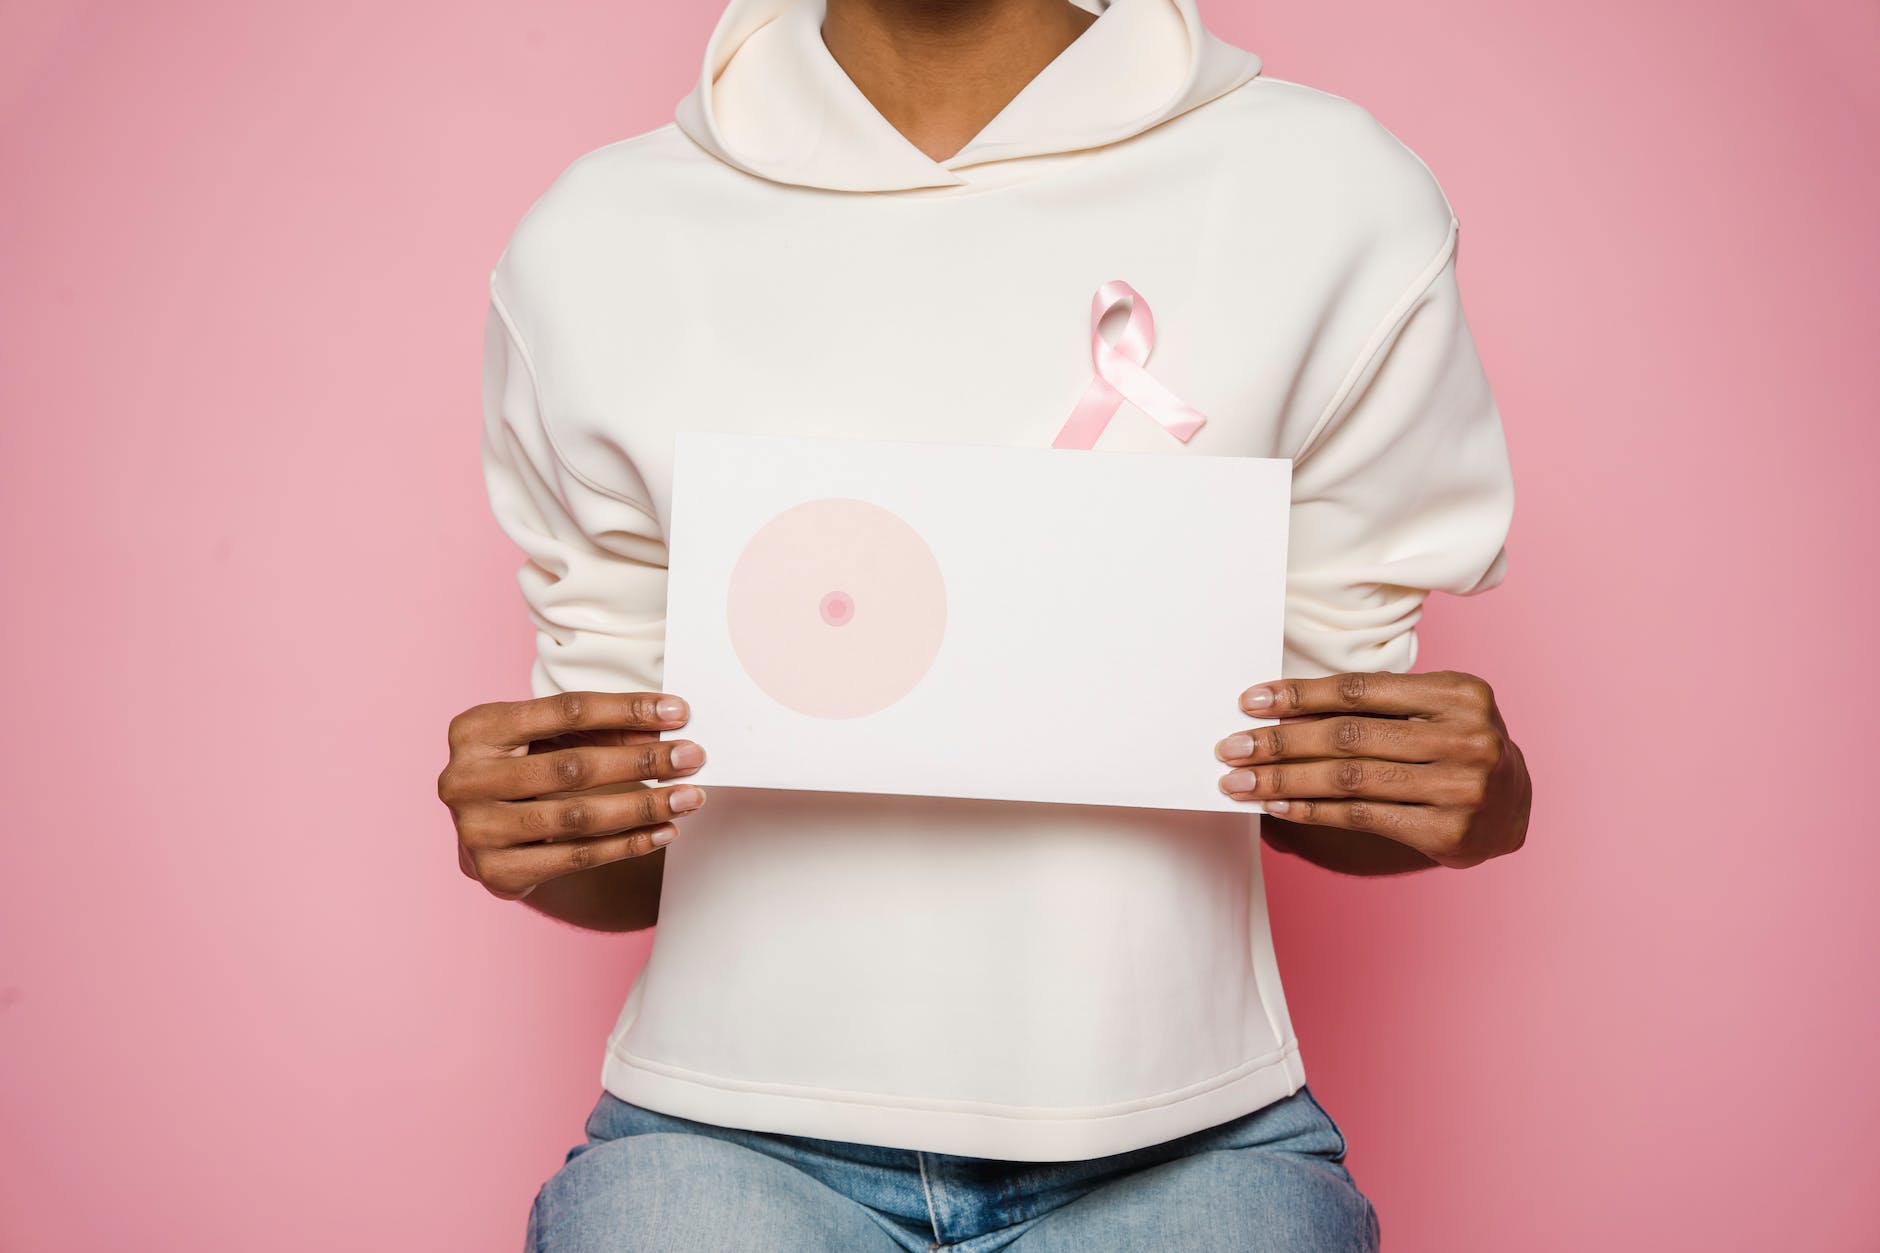 black female holding paper with painted one breast as symbol of cancer